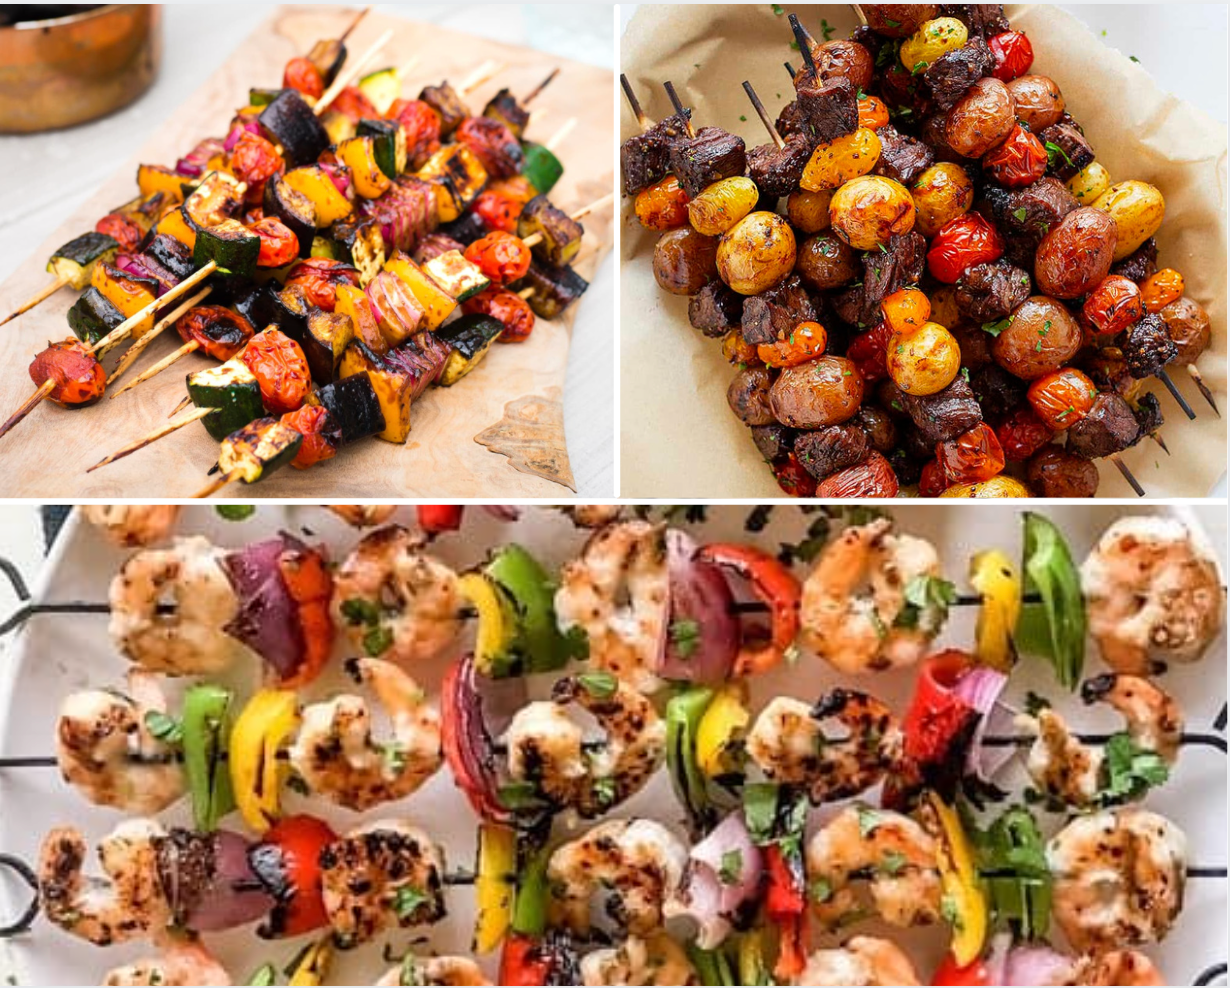 Tantalizing Kabob Recipes For a Midsummer Grill-Out